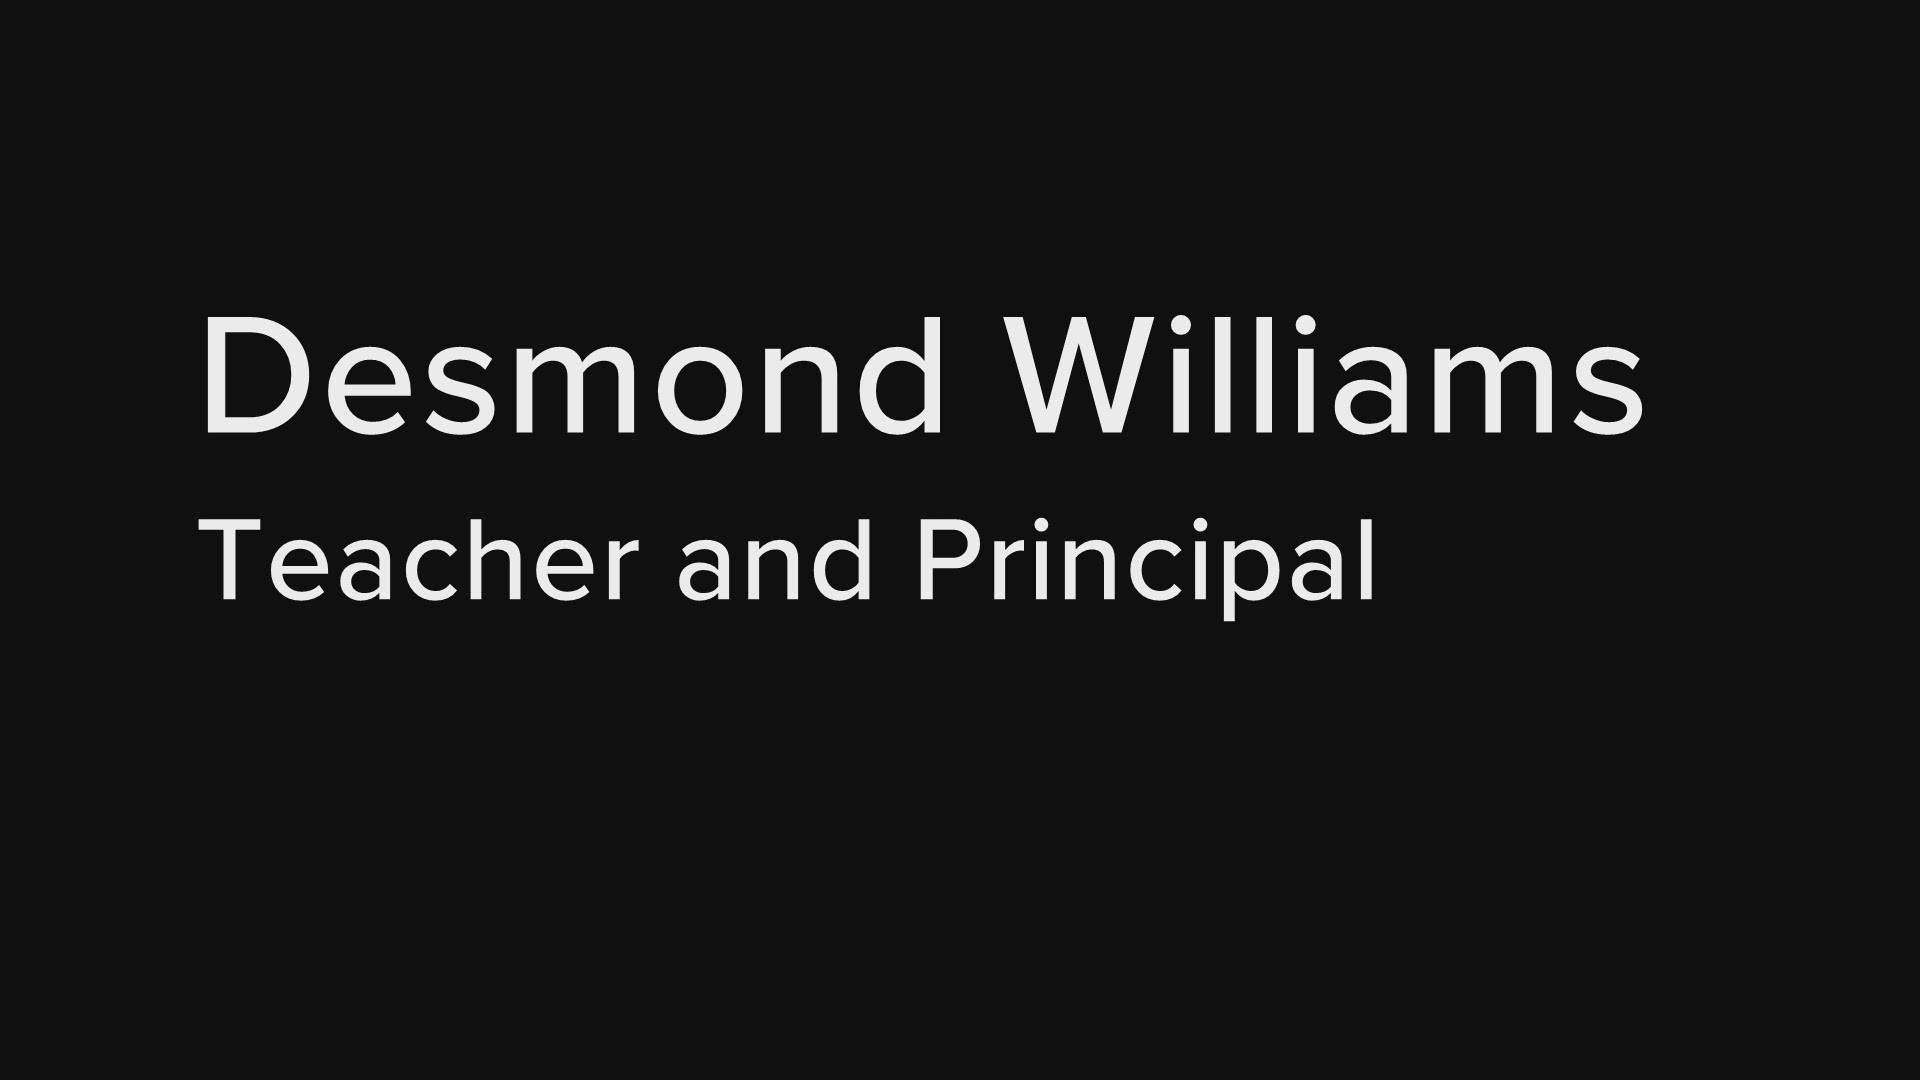 Desmond Williams, a former teacher and principal in the District of Columbia, talks about the need for more black male teachers in American classrooms.